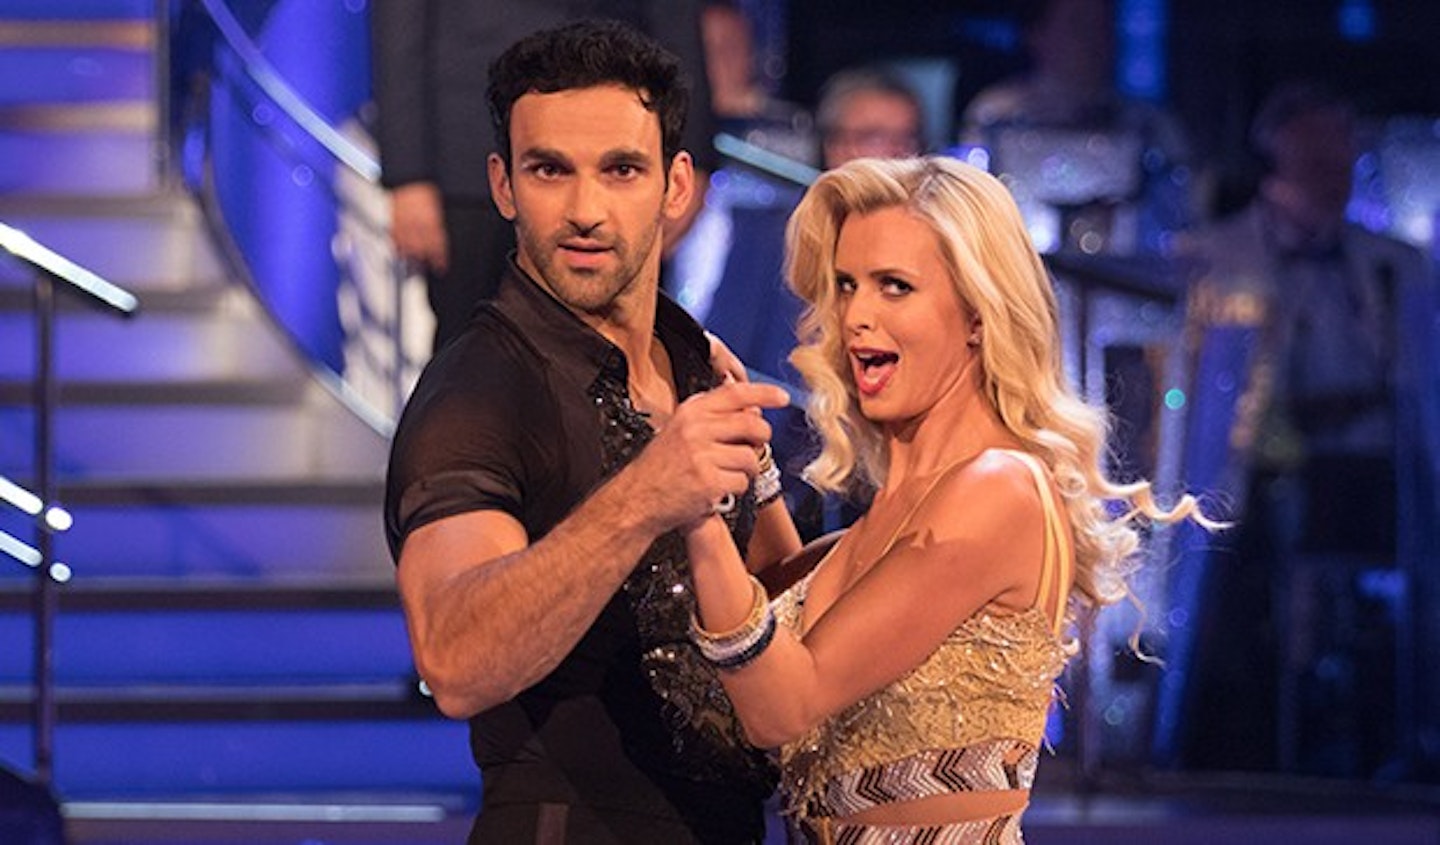 Davood Ghadami, Strictly Come Dancing